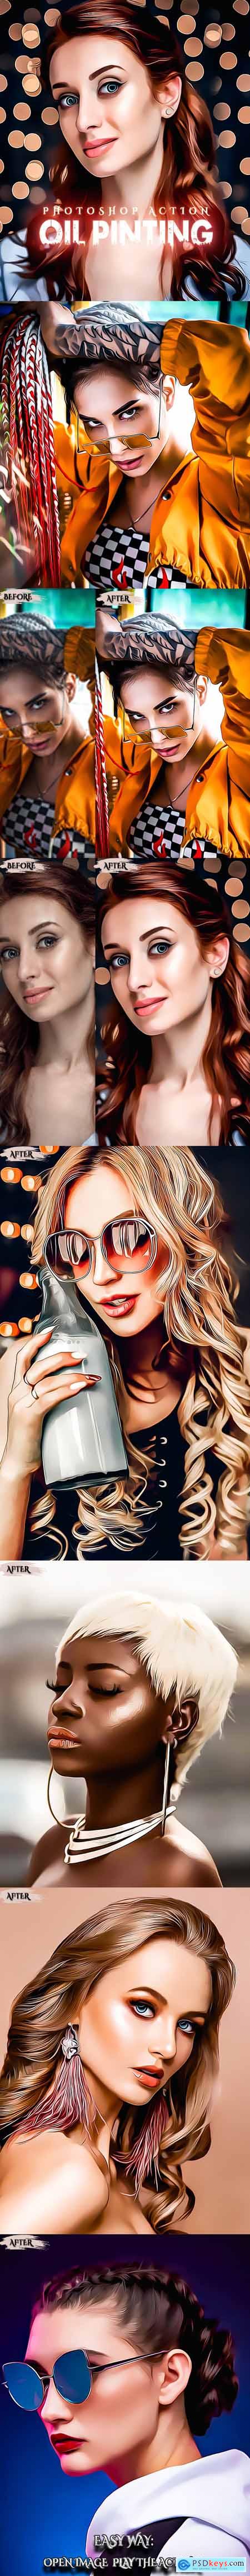 Oil Painting Photoshop Action 29918836